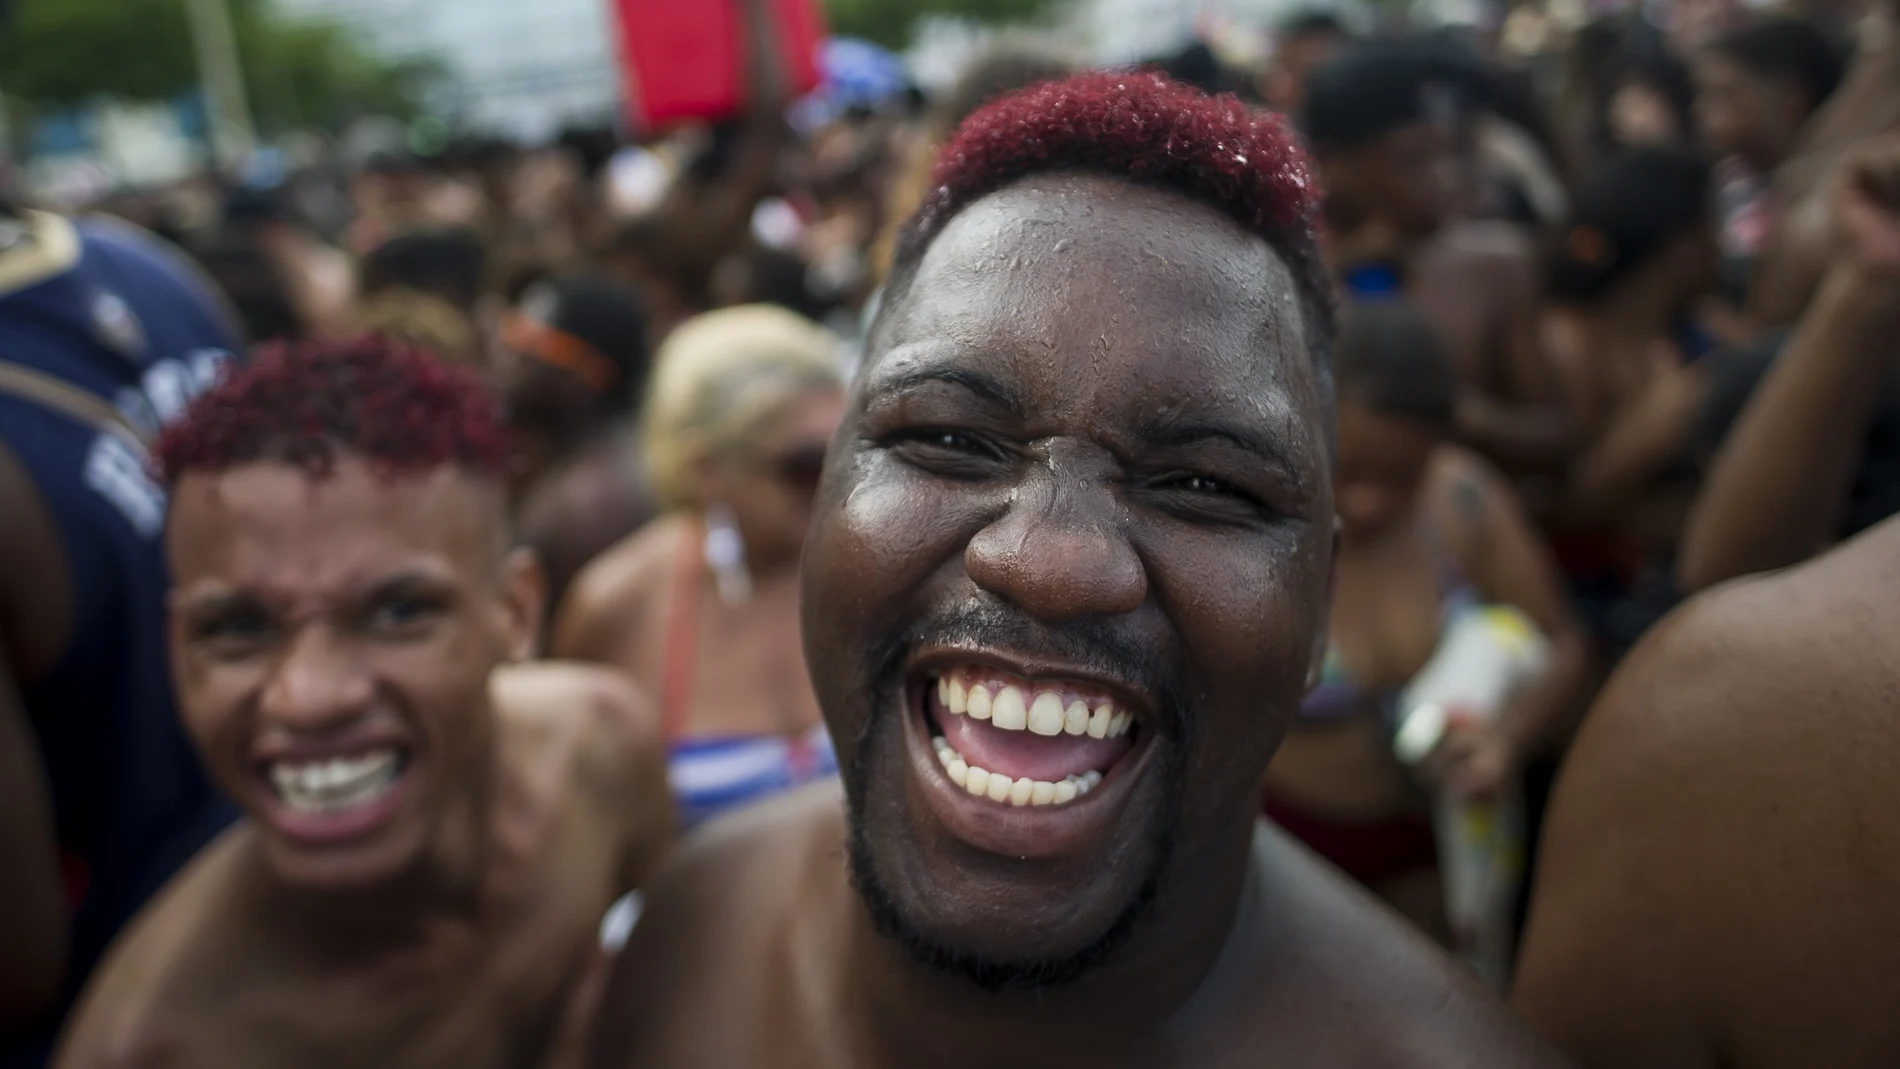 FILE - in this Jan. 12, 2020 file photo, revelers smile as they look on the camera during the "Bloco da Favorita" street party on Copacabana beach, Rio de Janeiro, Brazil. The city announced on Thursday, Sept. 24, said it has delayed its annual Carnival parade, saying the global spectacle cannot go ahead in February because of Brazilâ€™s continued vulnerability to the new coronavirus pandemic, but has yet to announce a decision about the Carnival street parties that take place across the city. (AP Photo/Bruna Prado, File)